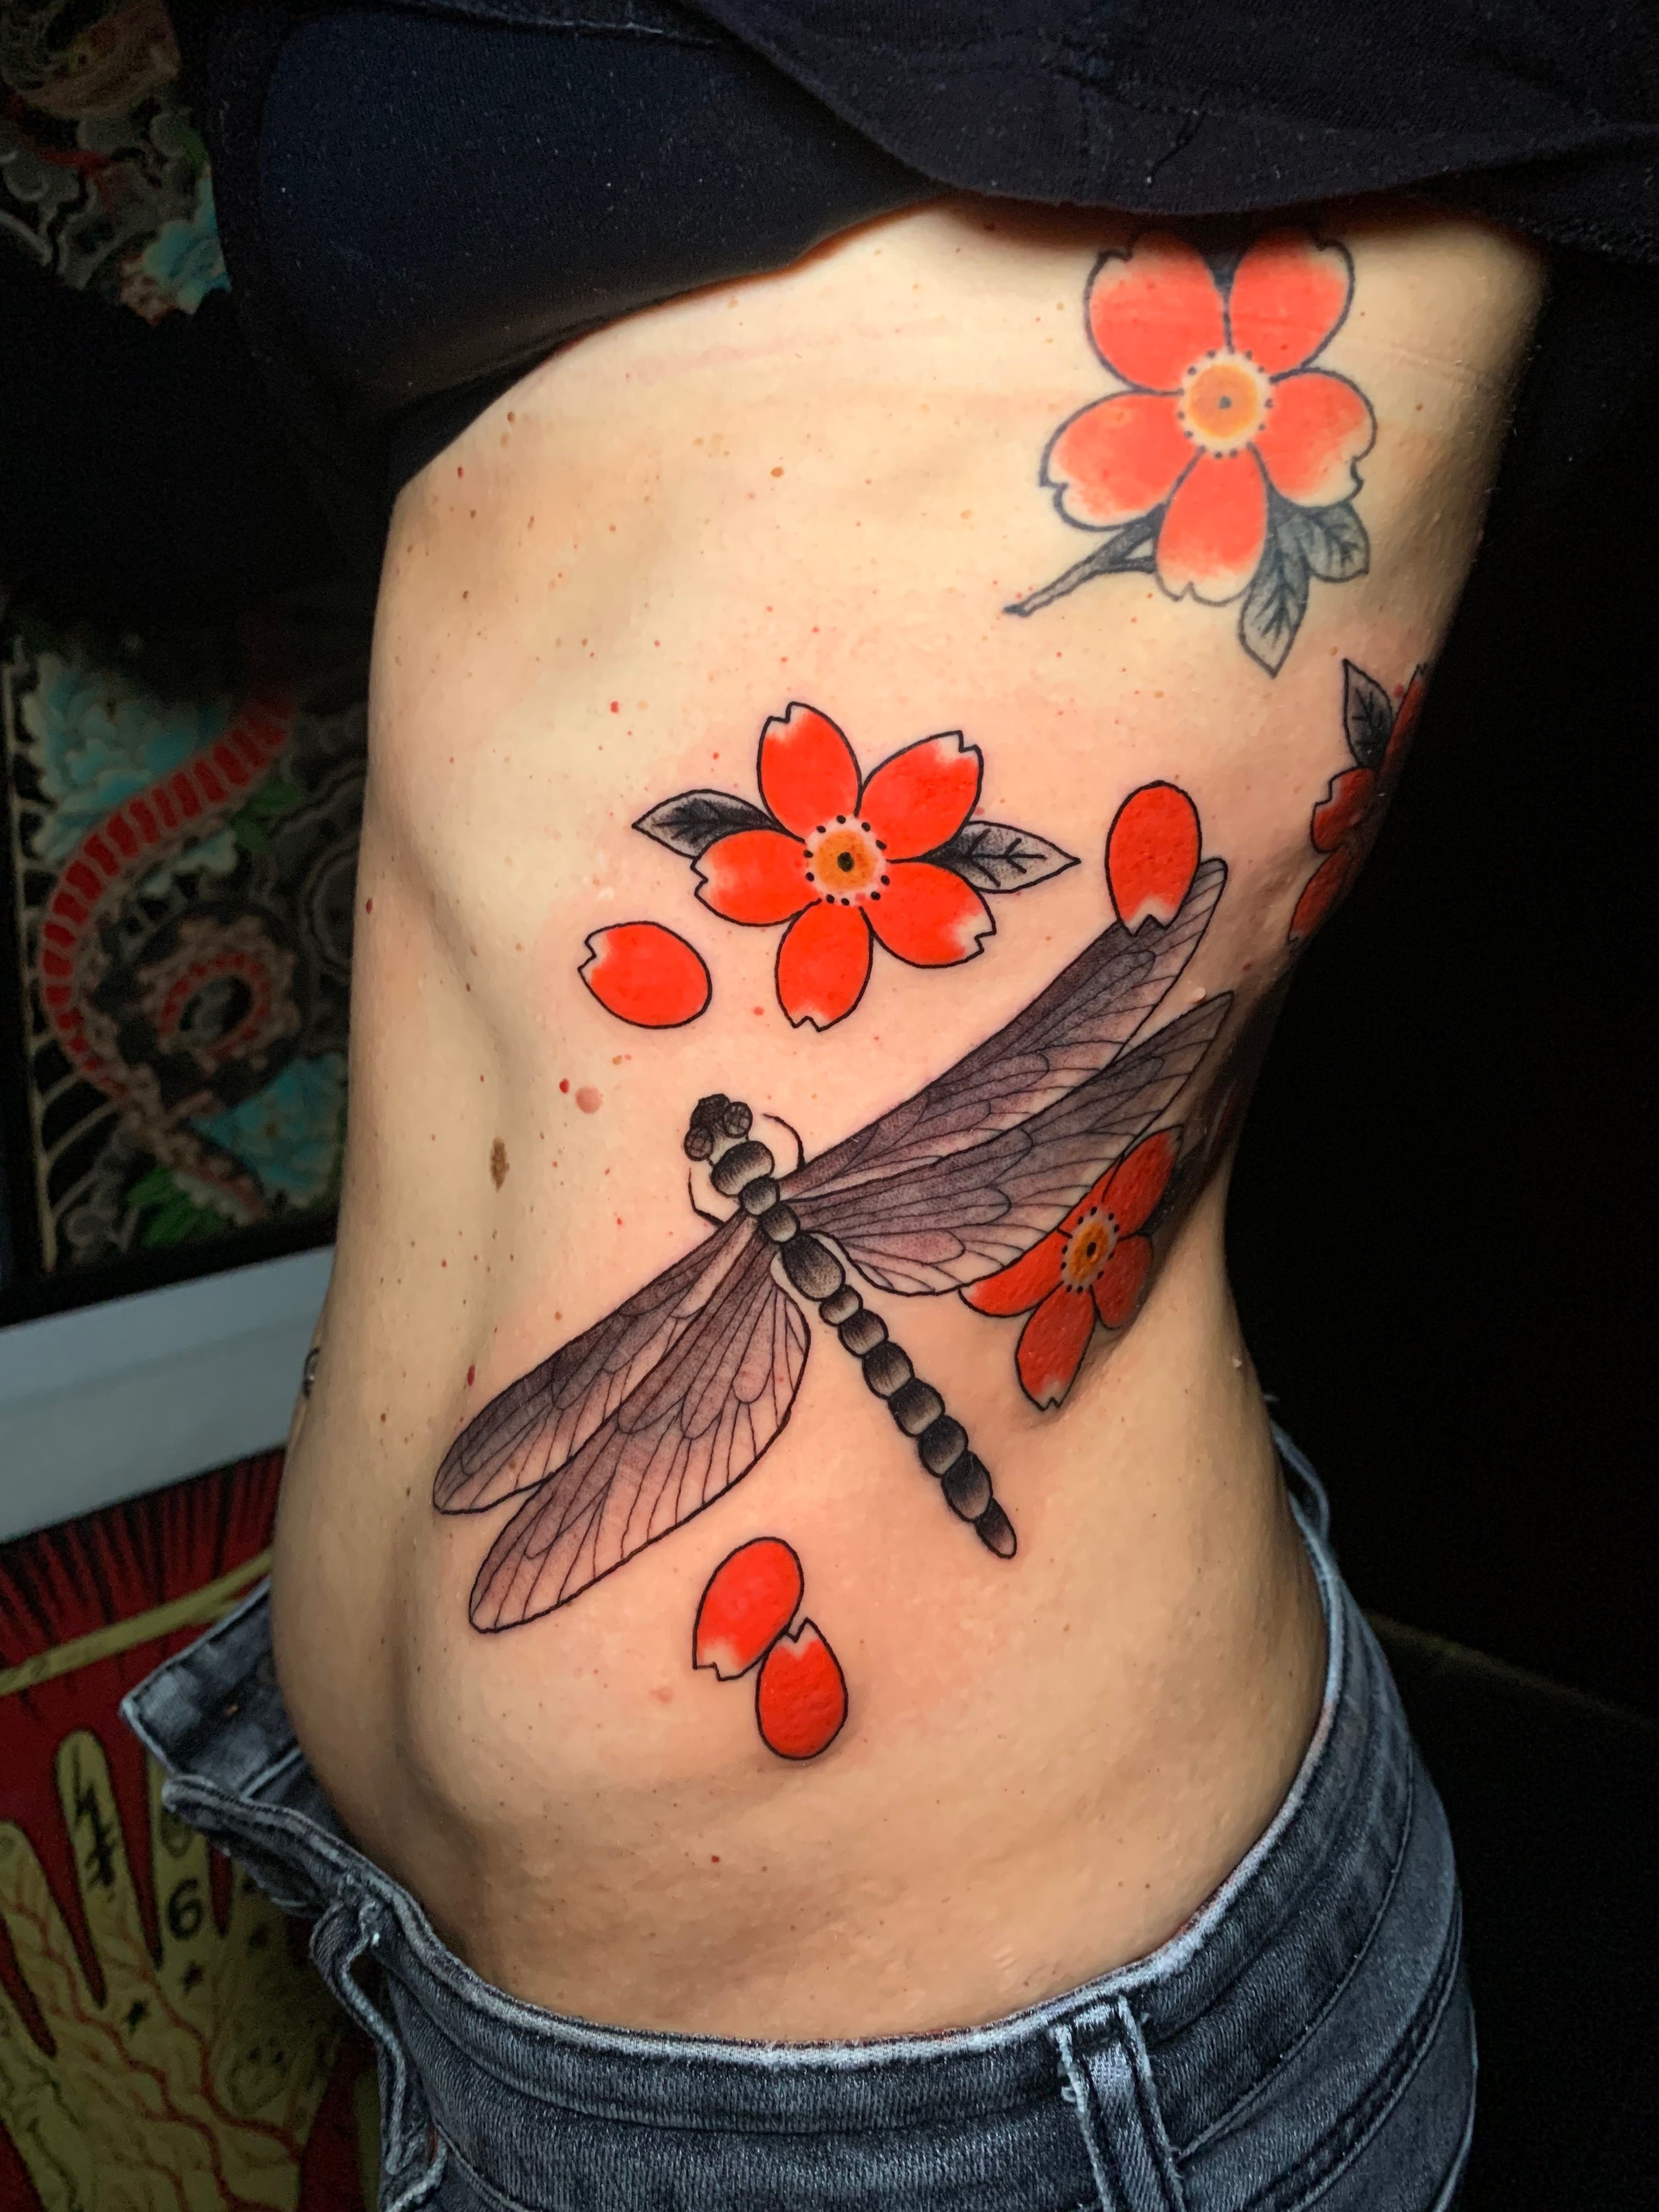 85 Dragonfly Tattoo Ideas  Meanings  A Trendy Symbolism